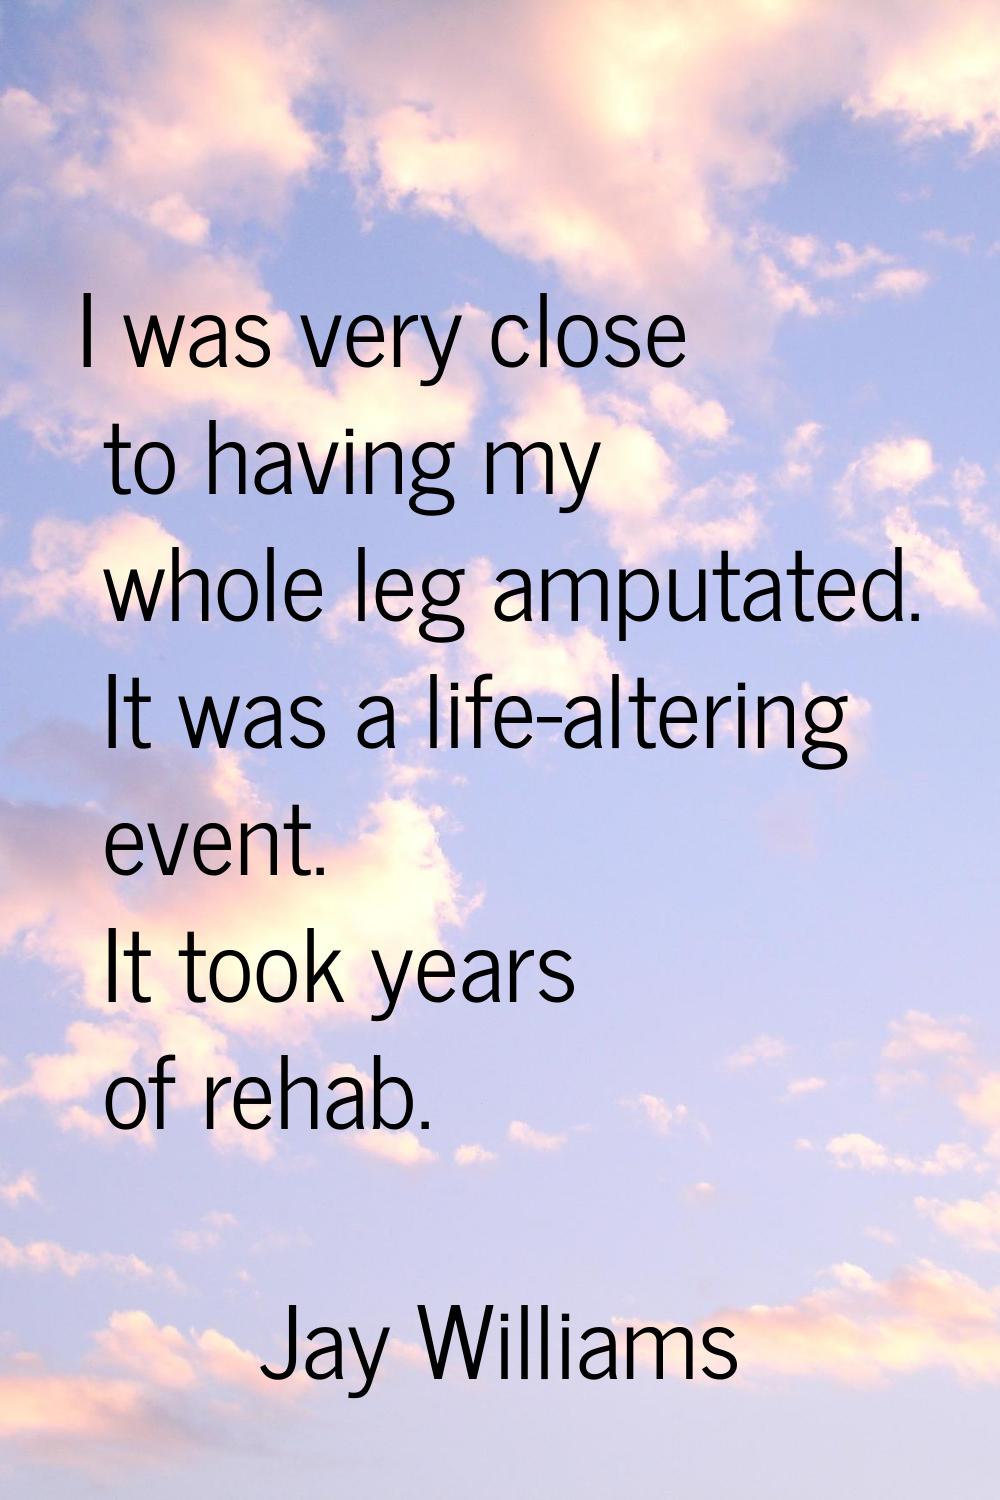 I was very close to having my whole leg amputated. It was a life-altering event. It took years of r